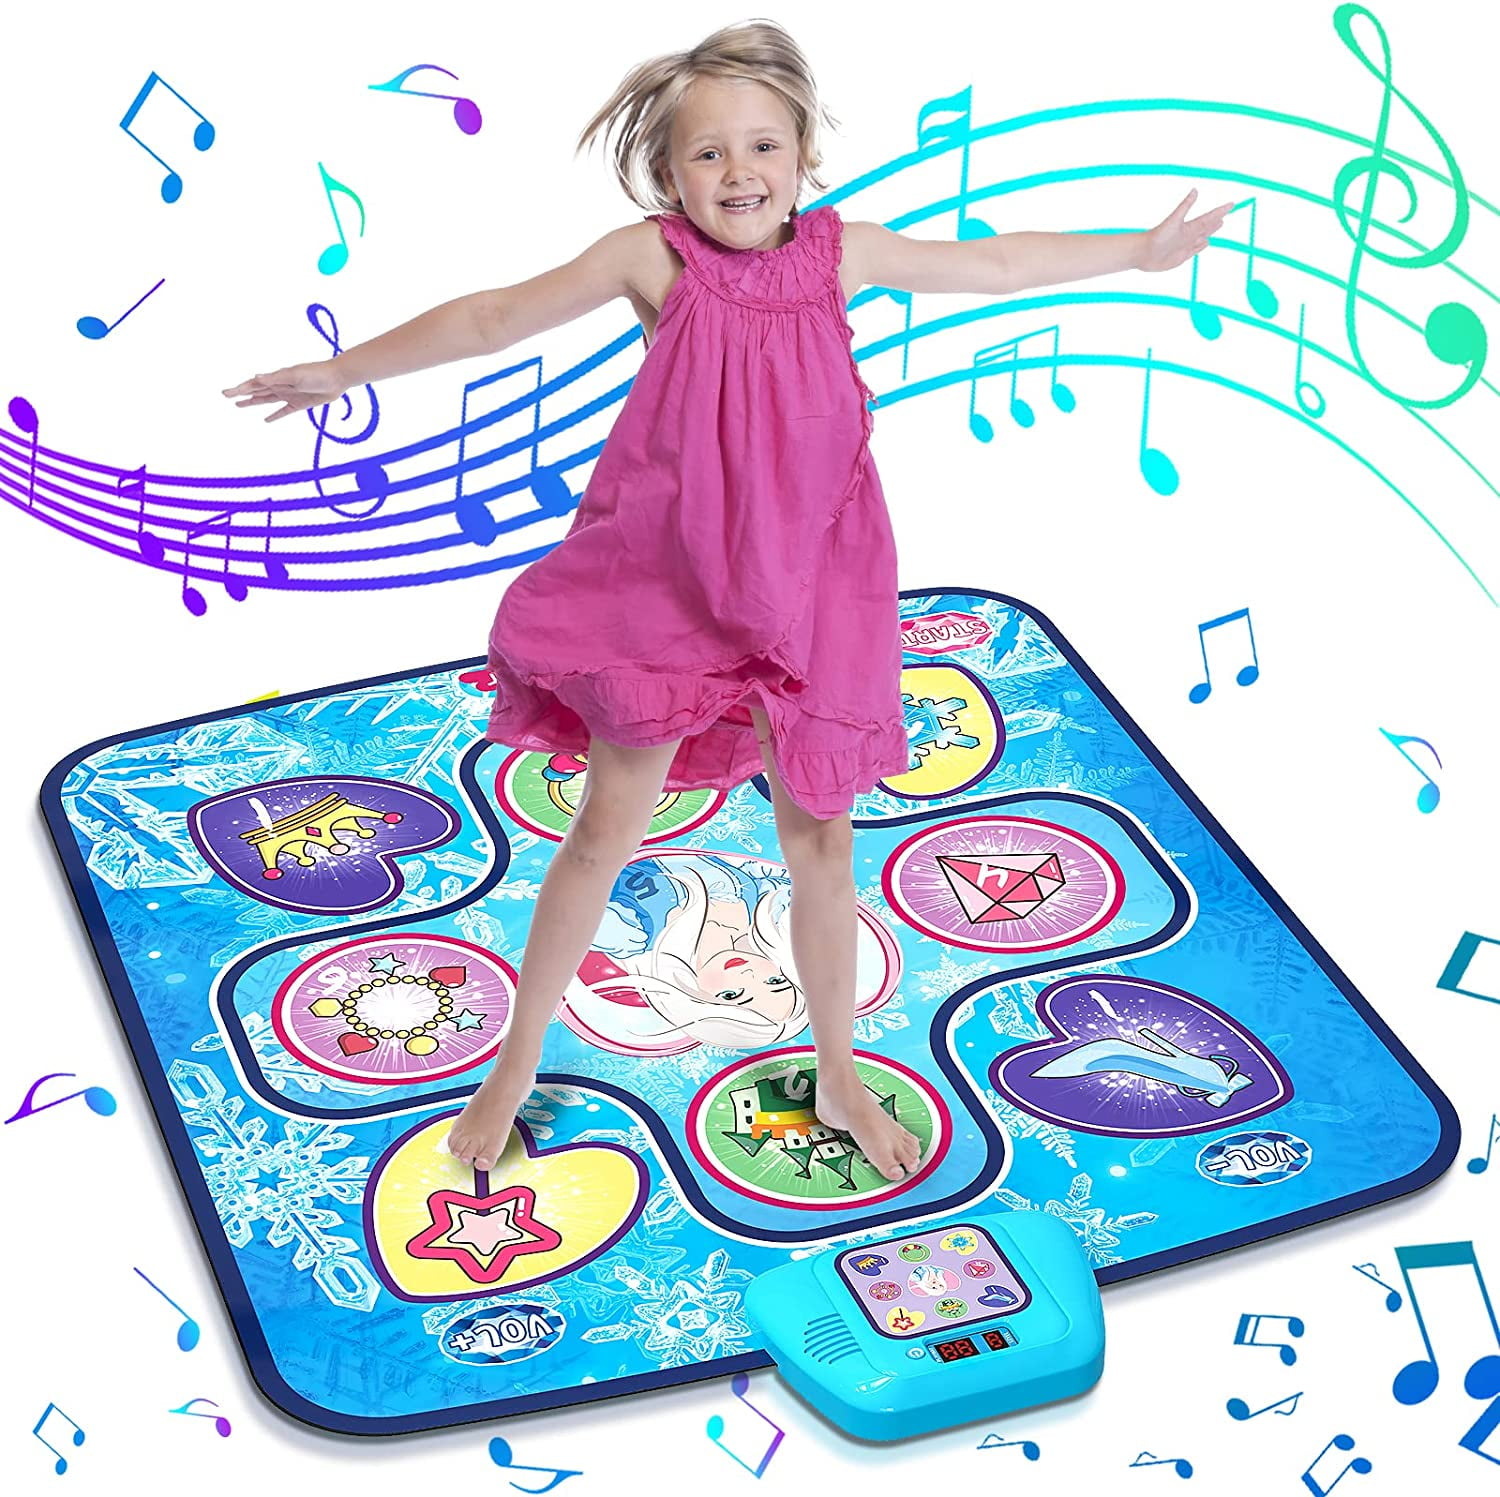 Dezomia Kids Dance Mat 39.37 x 33.85 Electronic Musical Play Mats Pink Dance Pad Non-Slip Dancing Floor Mat Game Toy with 5 Game Modes， Easter Birthday Gifts for Ages 3-12 Girls Kids Toys 